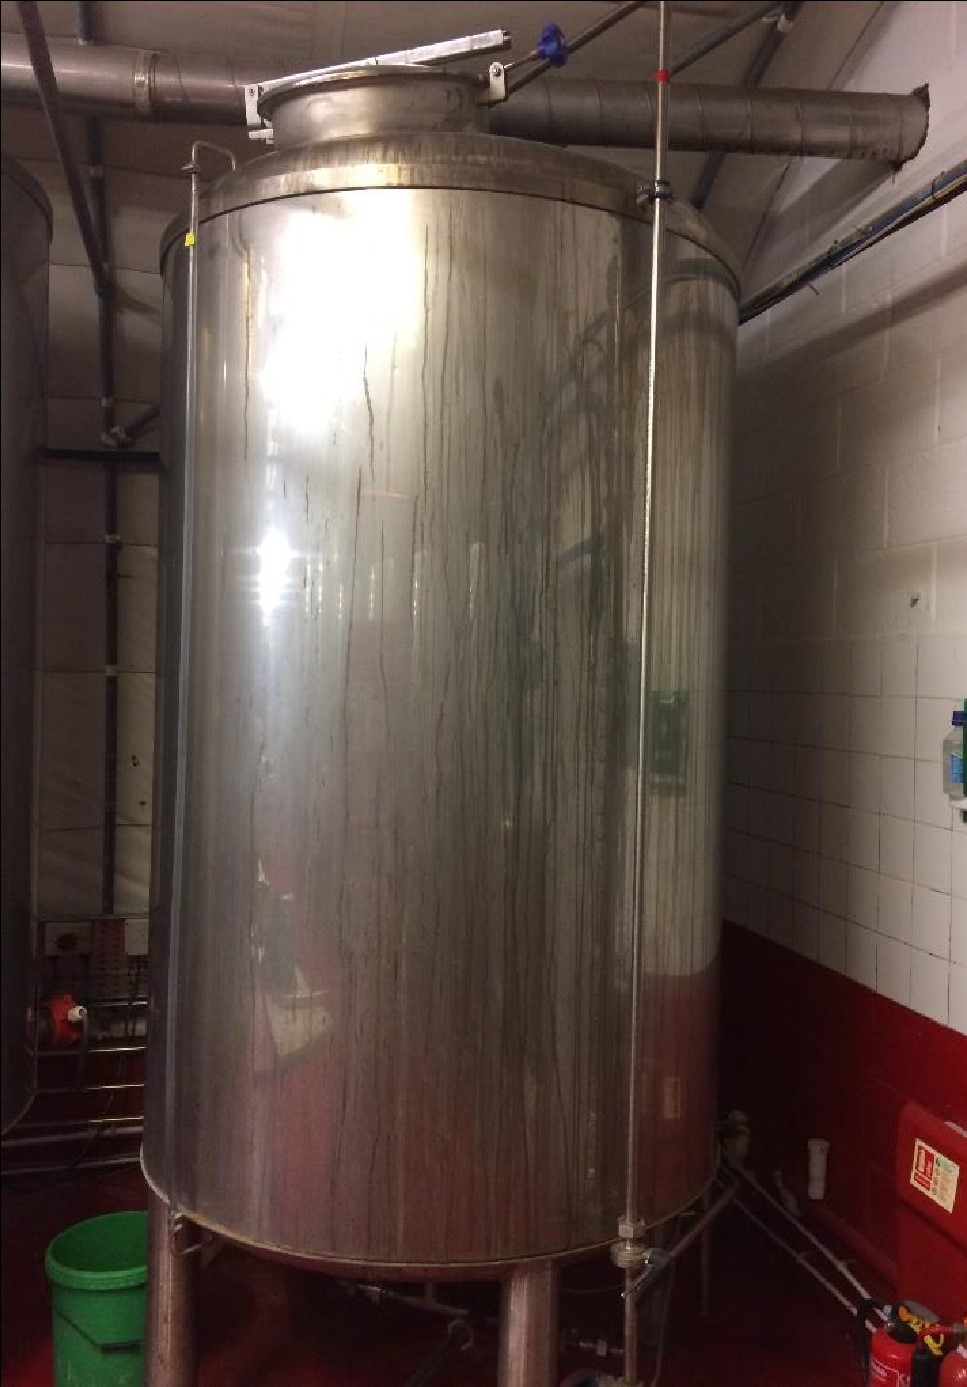 Microbrewery Equipment for Capacity 10 BBL / Brew